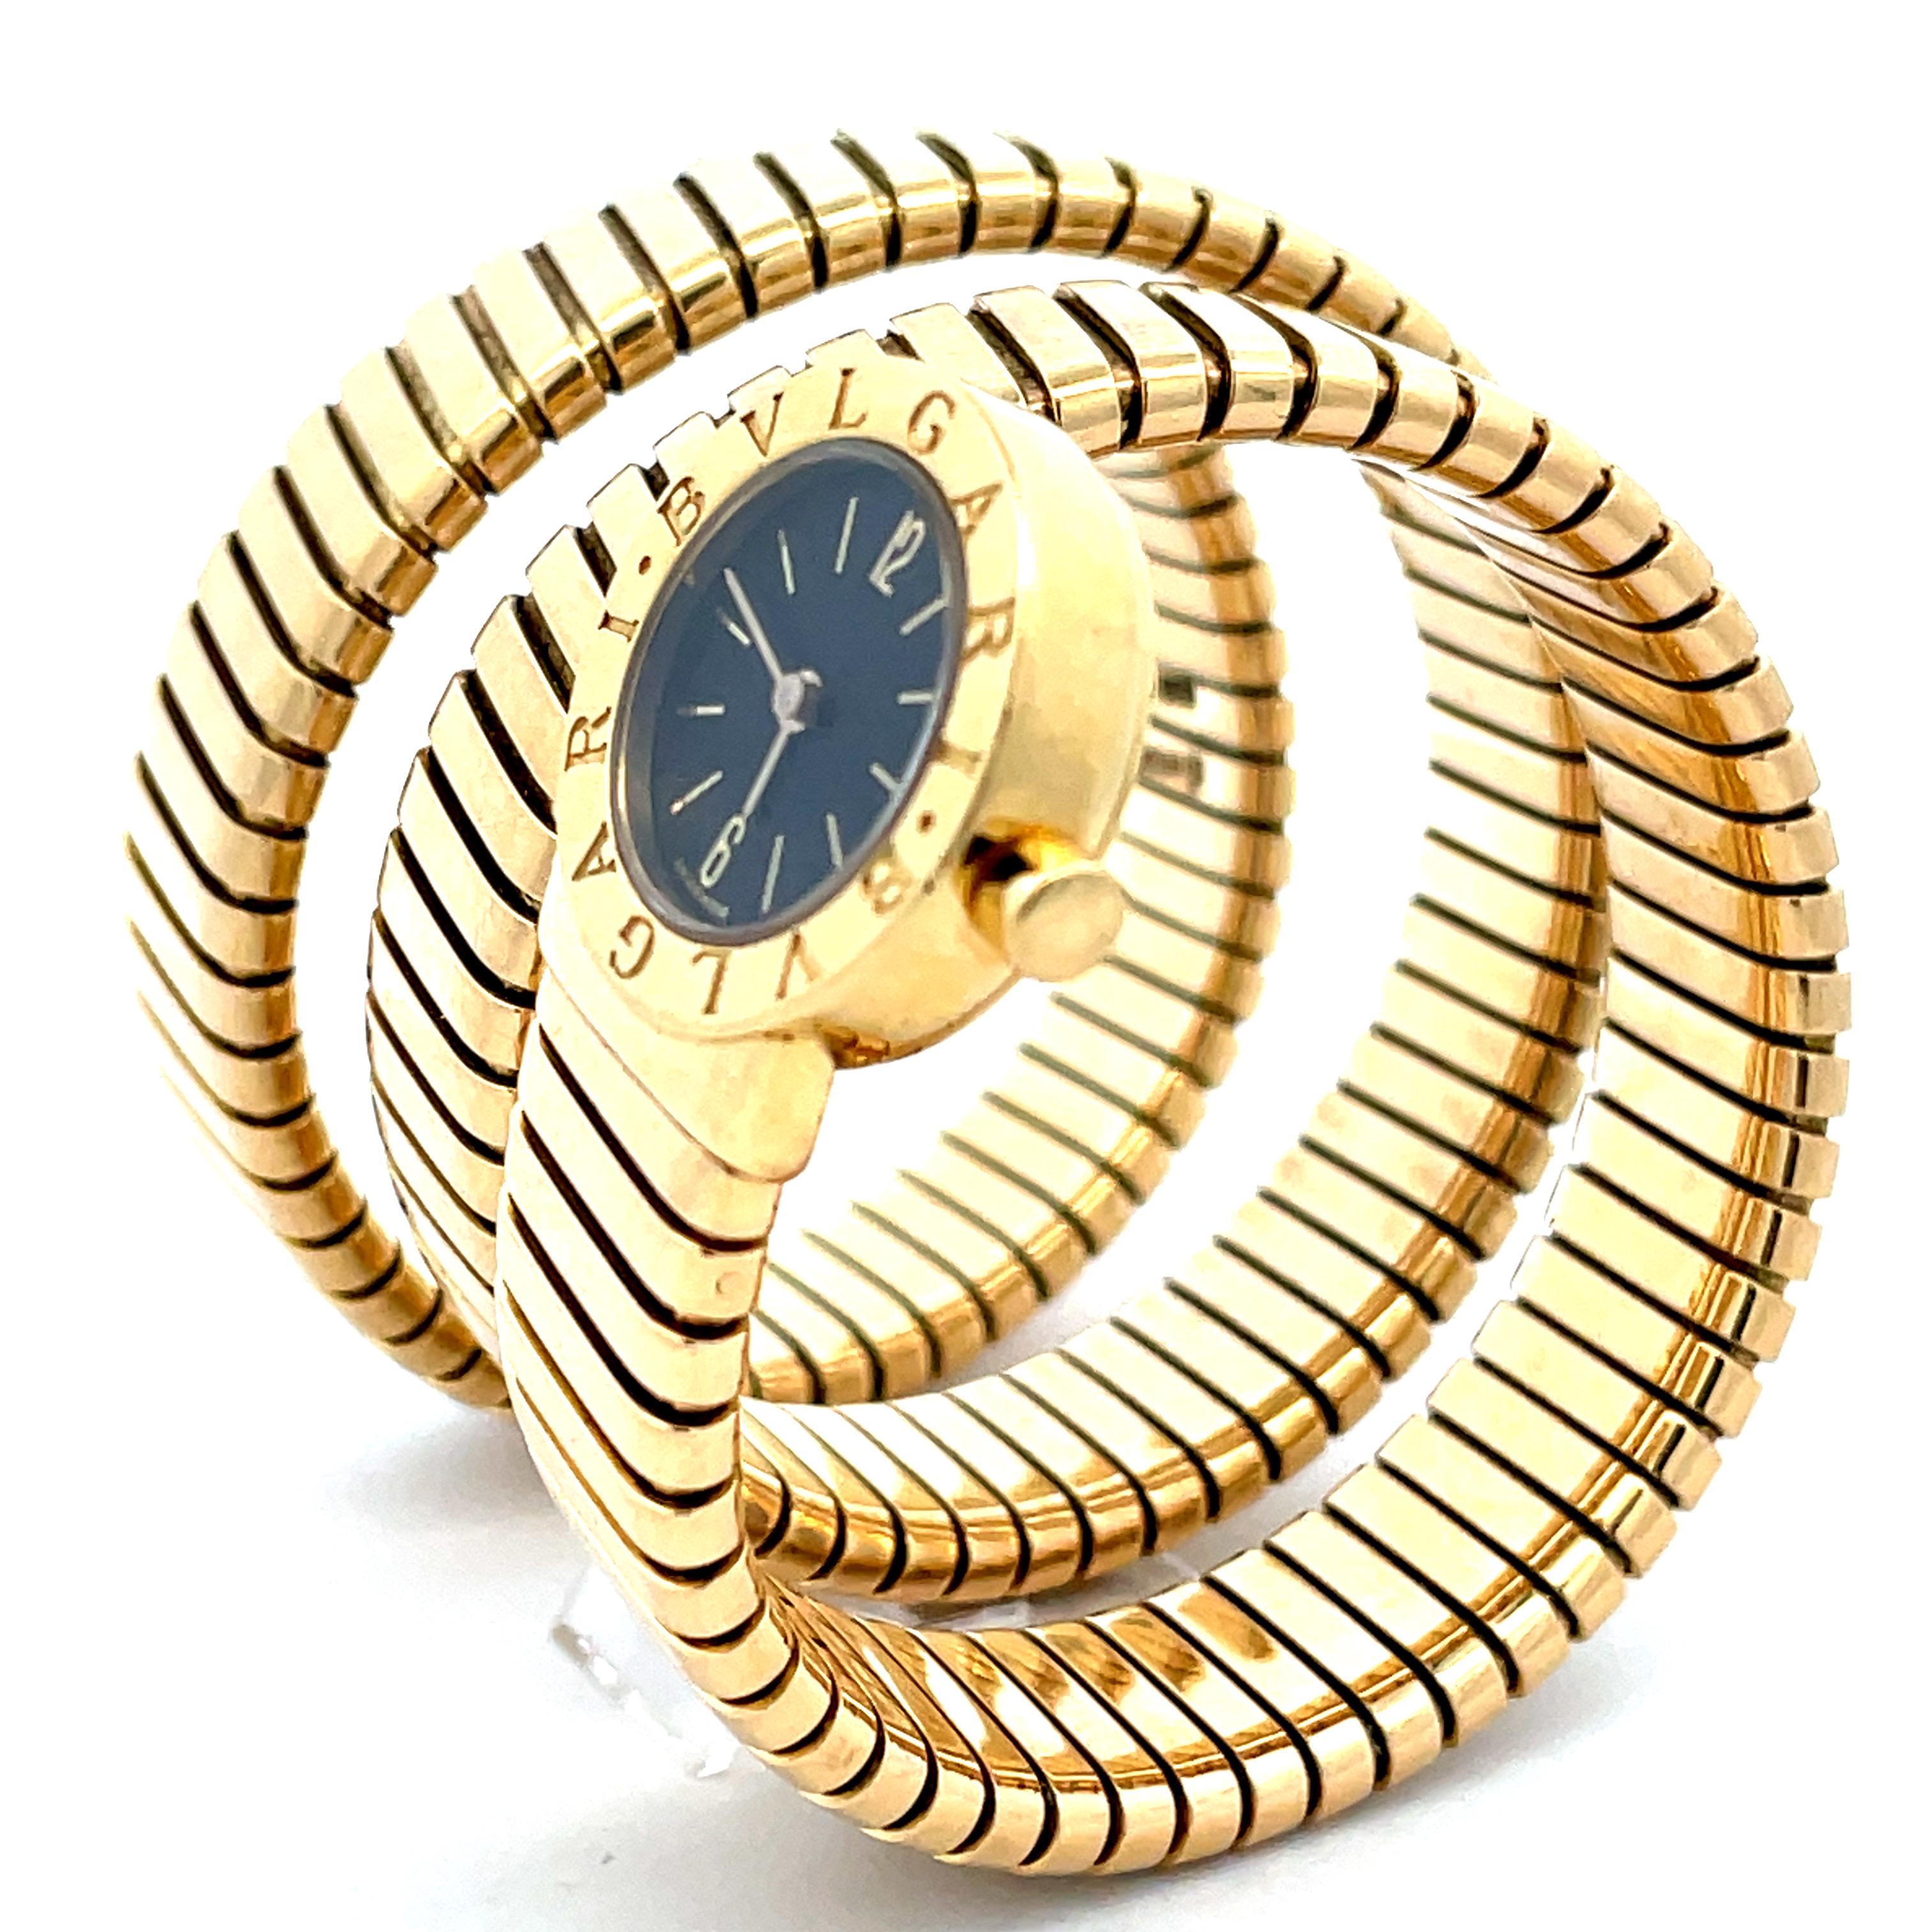 It doesn't get better than this Bulgari Tubogas lady's snake bracelet watch in 18k yellow gold. This quartz watch has a small round head and black dial. An iconic watch you will wear forever. 
1978 circa.
Similar reference can be found in BVLGARI